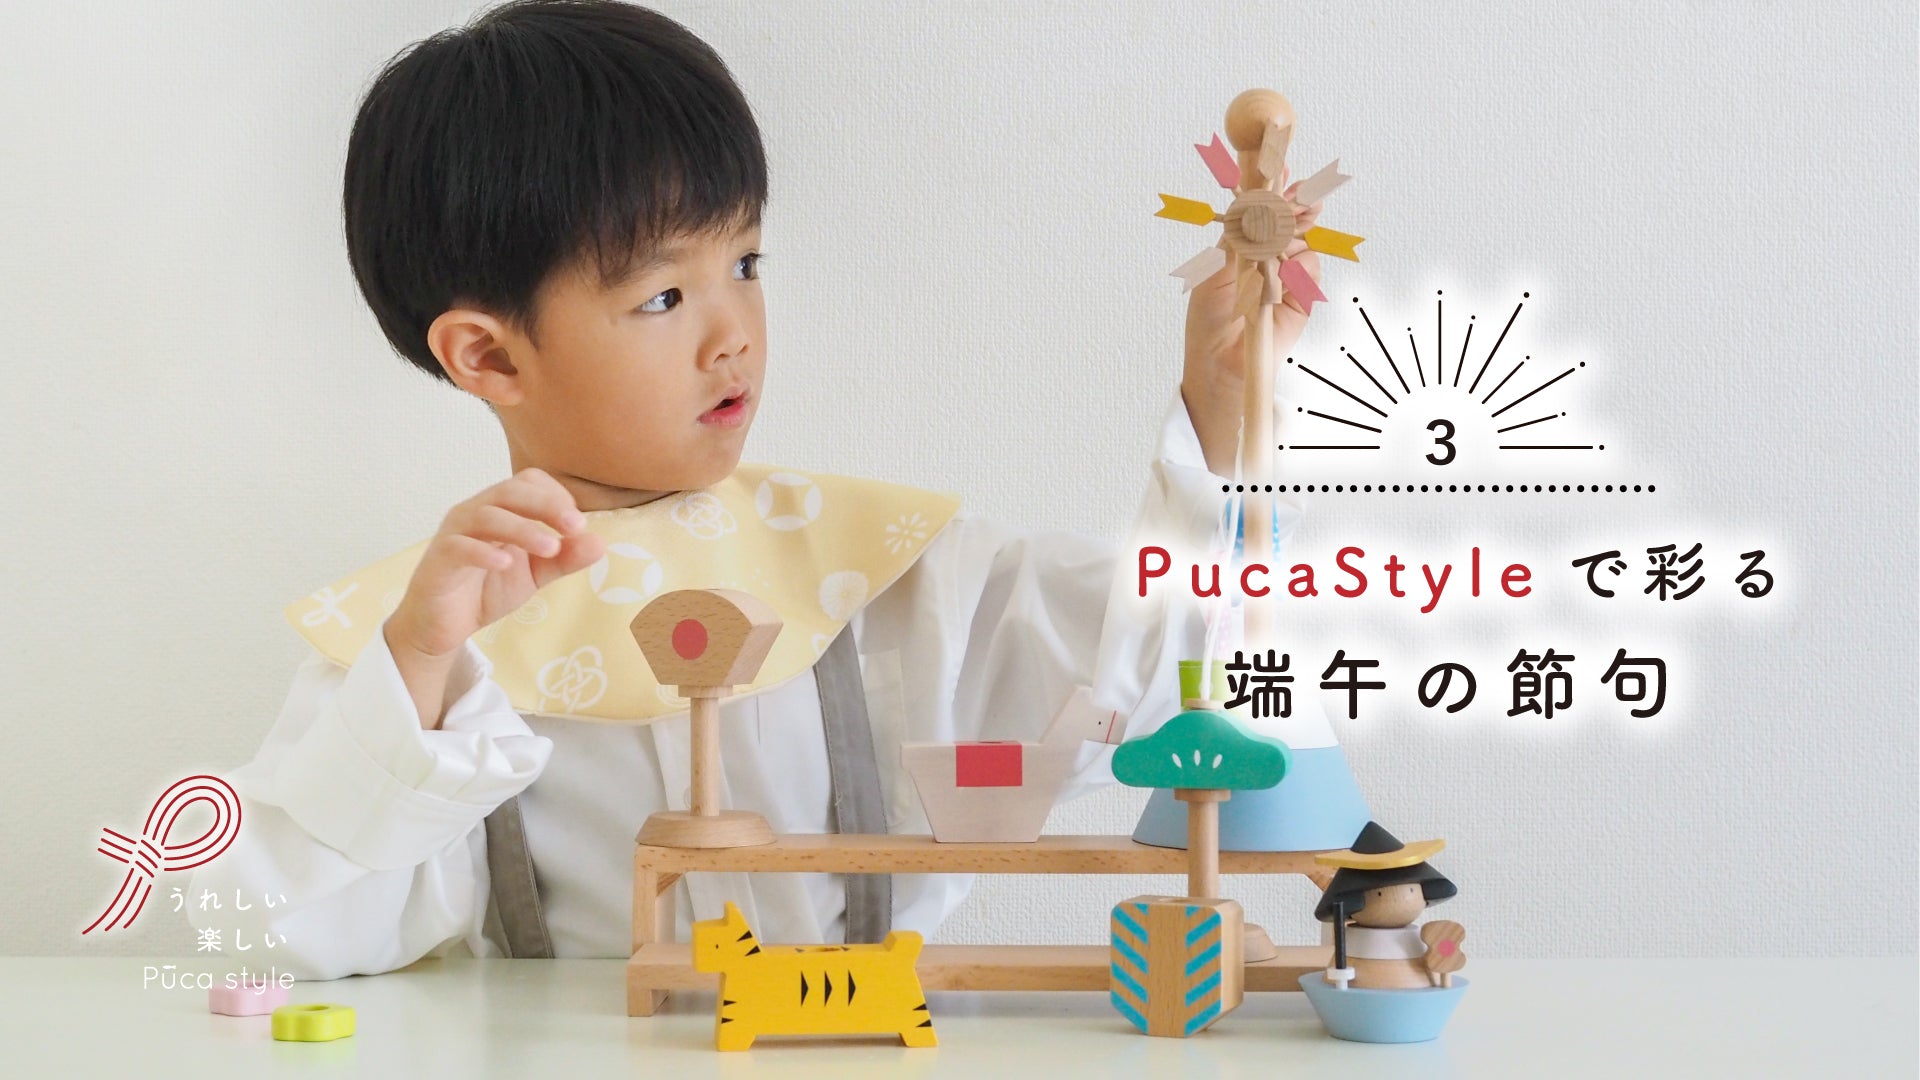 ３.Puca Styleで彩る端午の節句